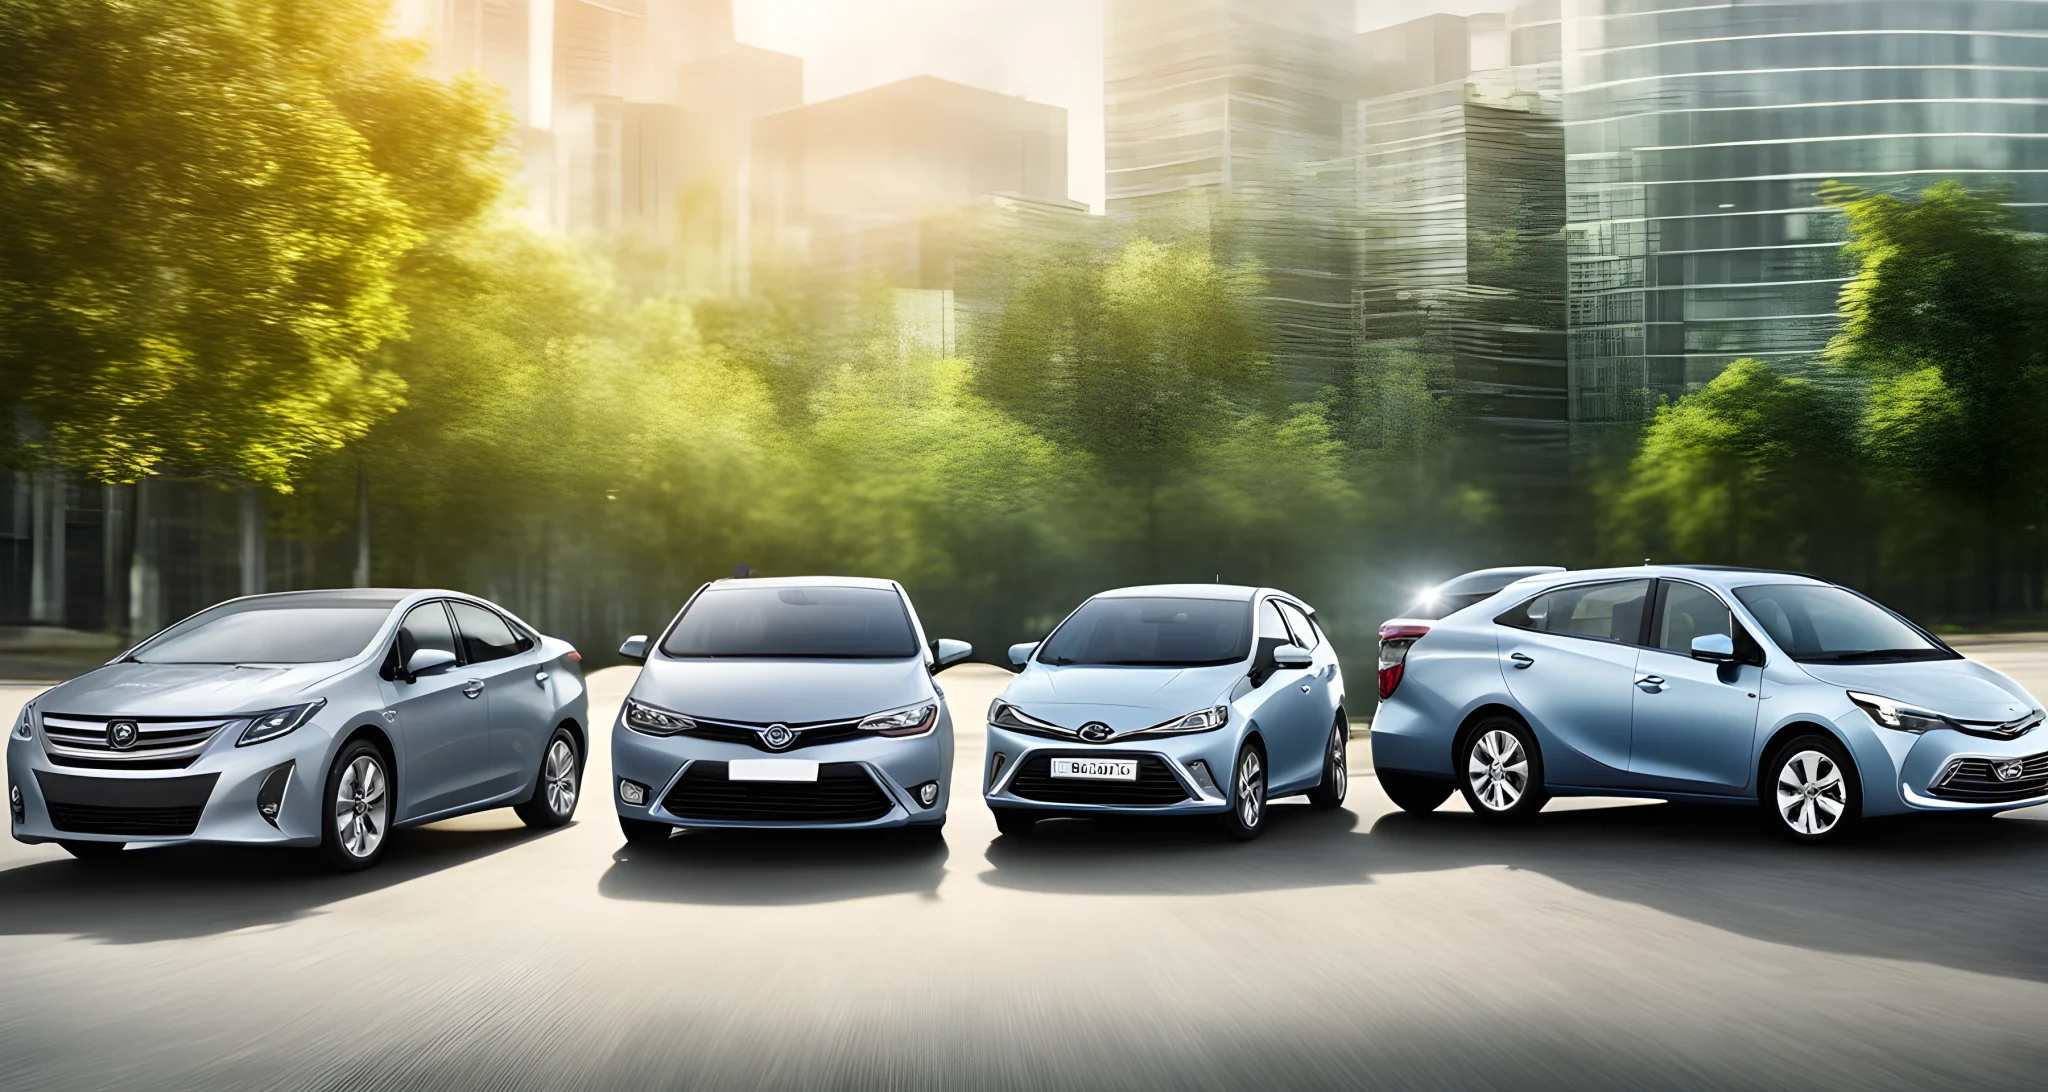 The image depicts a lineup of the latest hybrid vehicles from various car manufacturers.